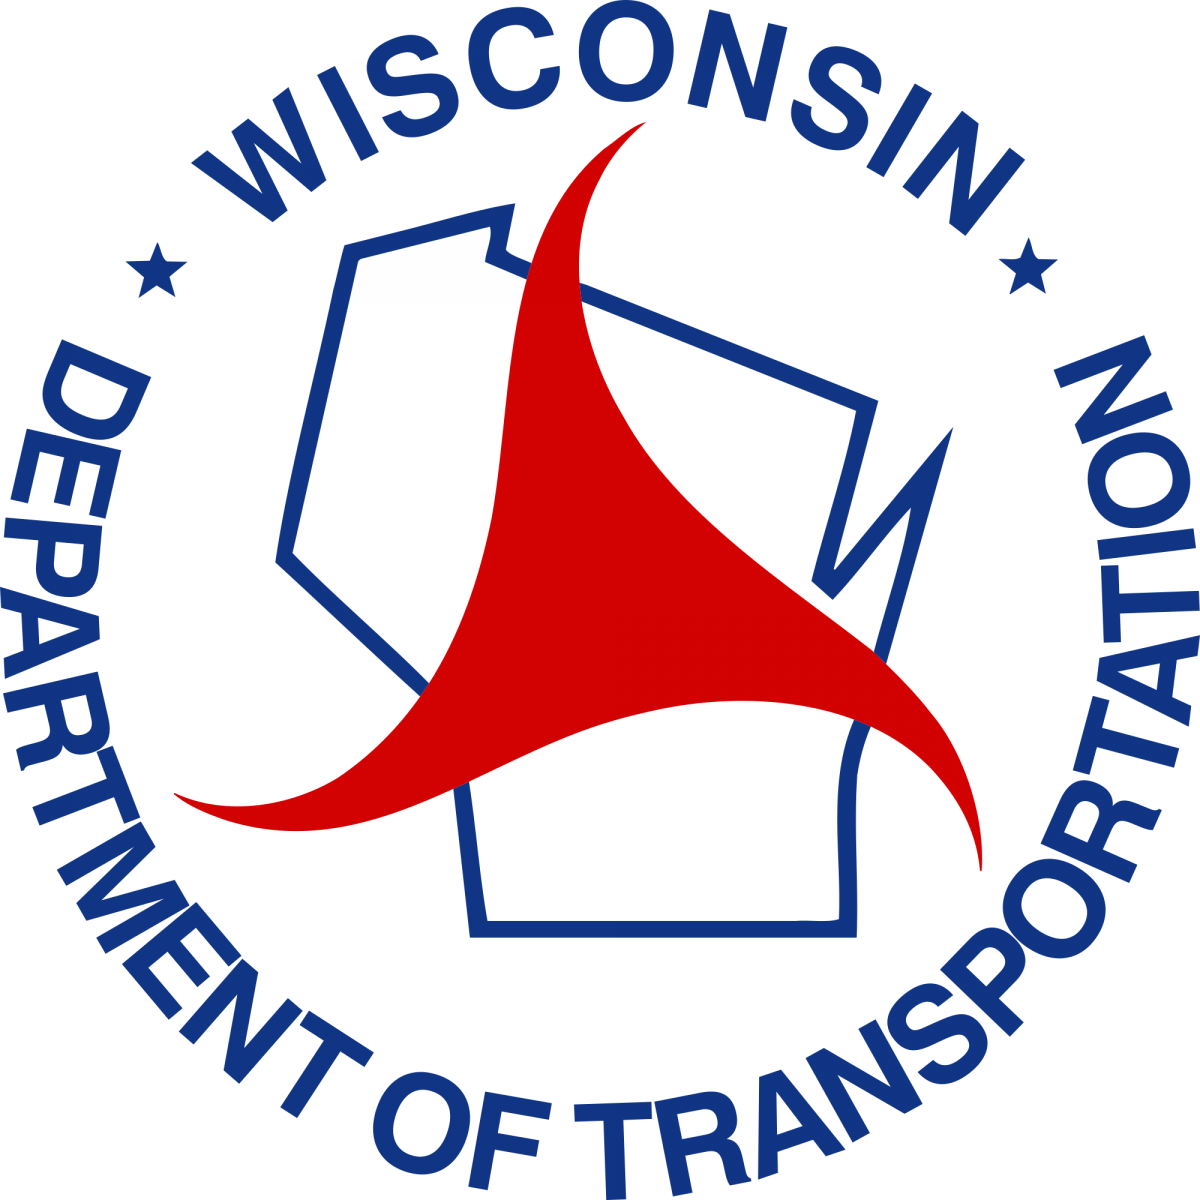 WisDOT says highway construction work being put on hold for Memorial Day weekend